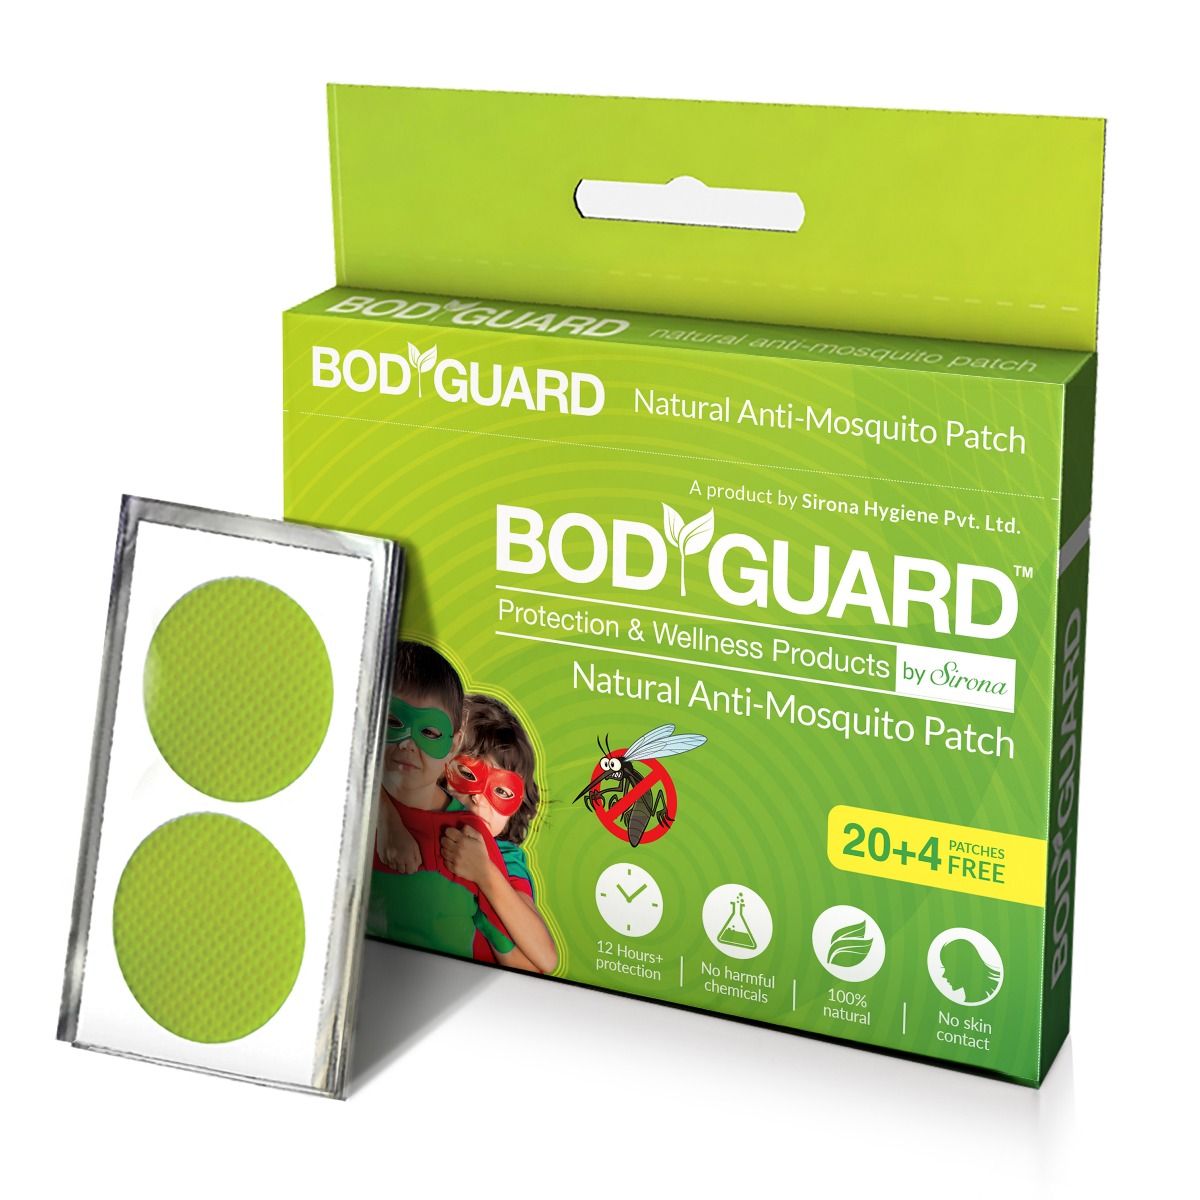 Buy Bodyguard Premium Natural Anti-Mosquito Patches, 24 Count (20 + 4 Free) Online